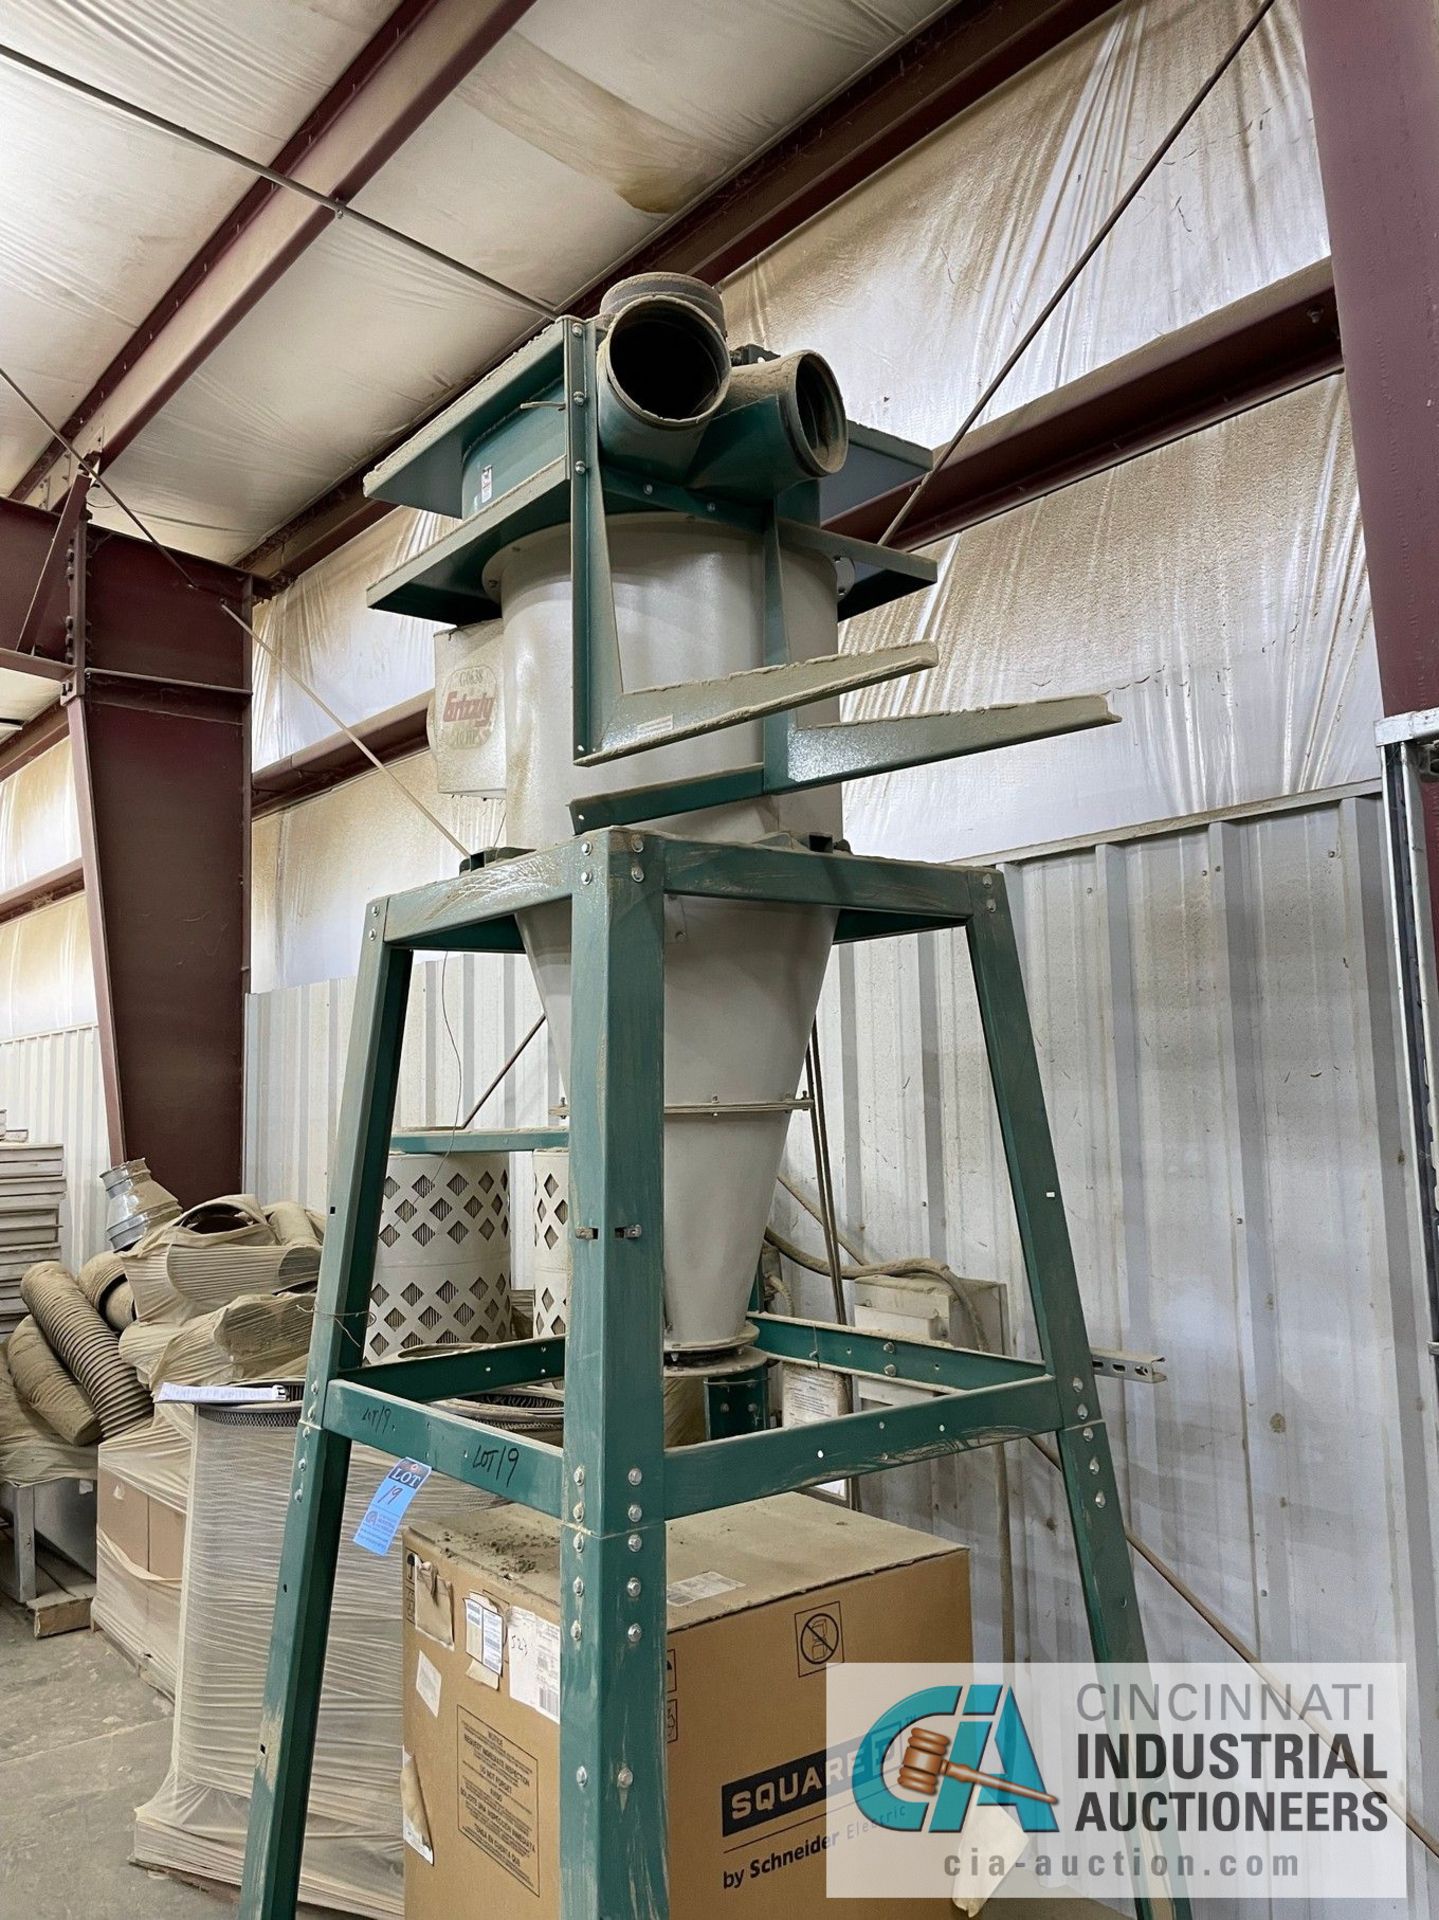 10-HP GRIZZLY MODEL G-0638 CYCLONE DUST COLLECTOR WITH SKID OF FILTERS, APPROX. 12' OVERALL HEIGHT - Image 4 of 5